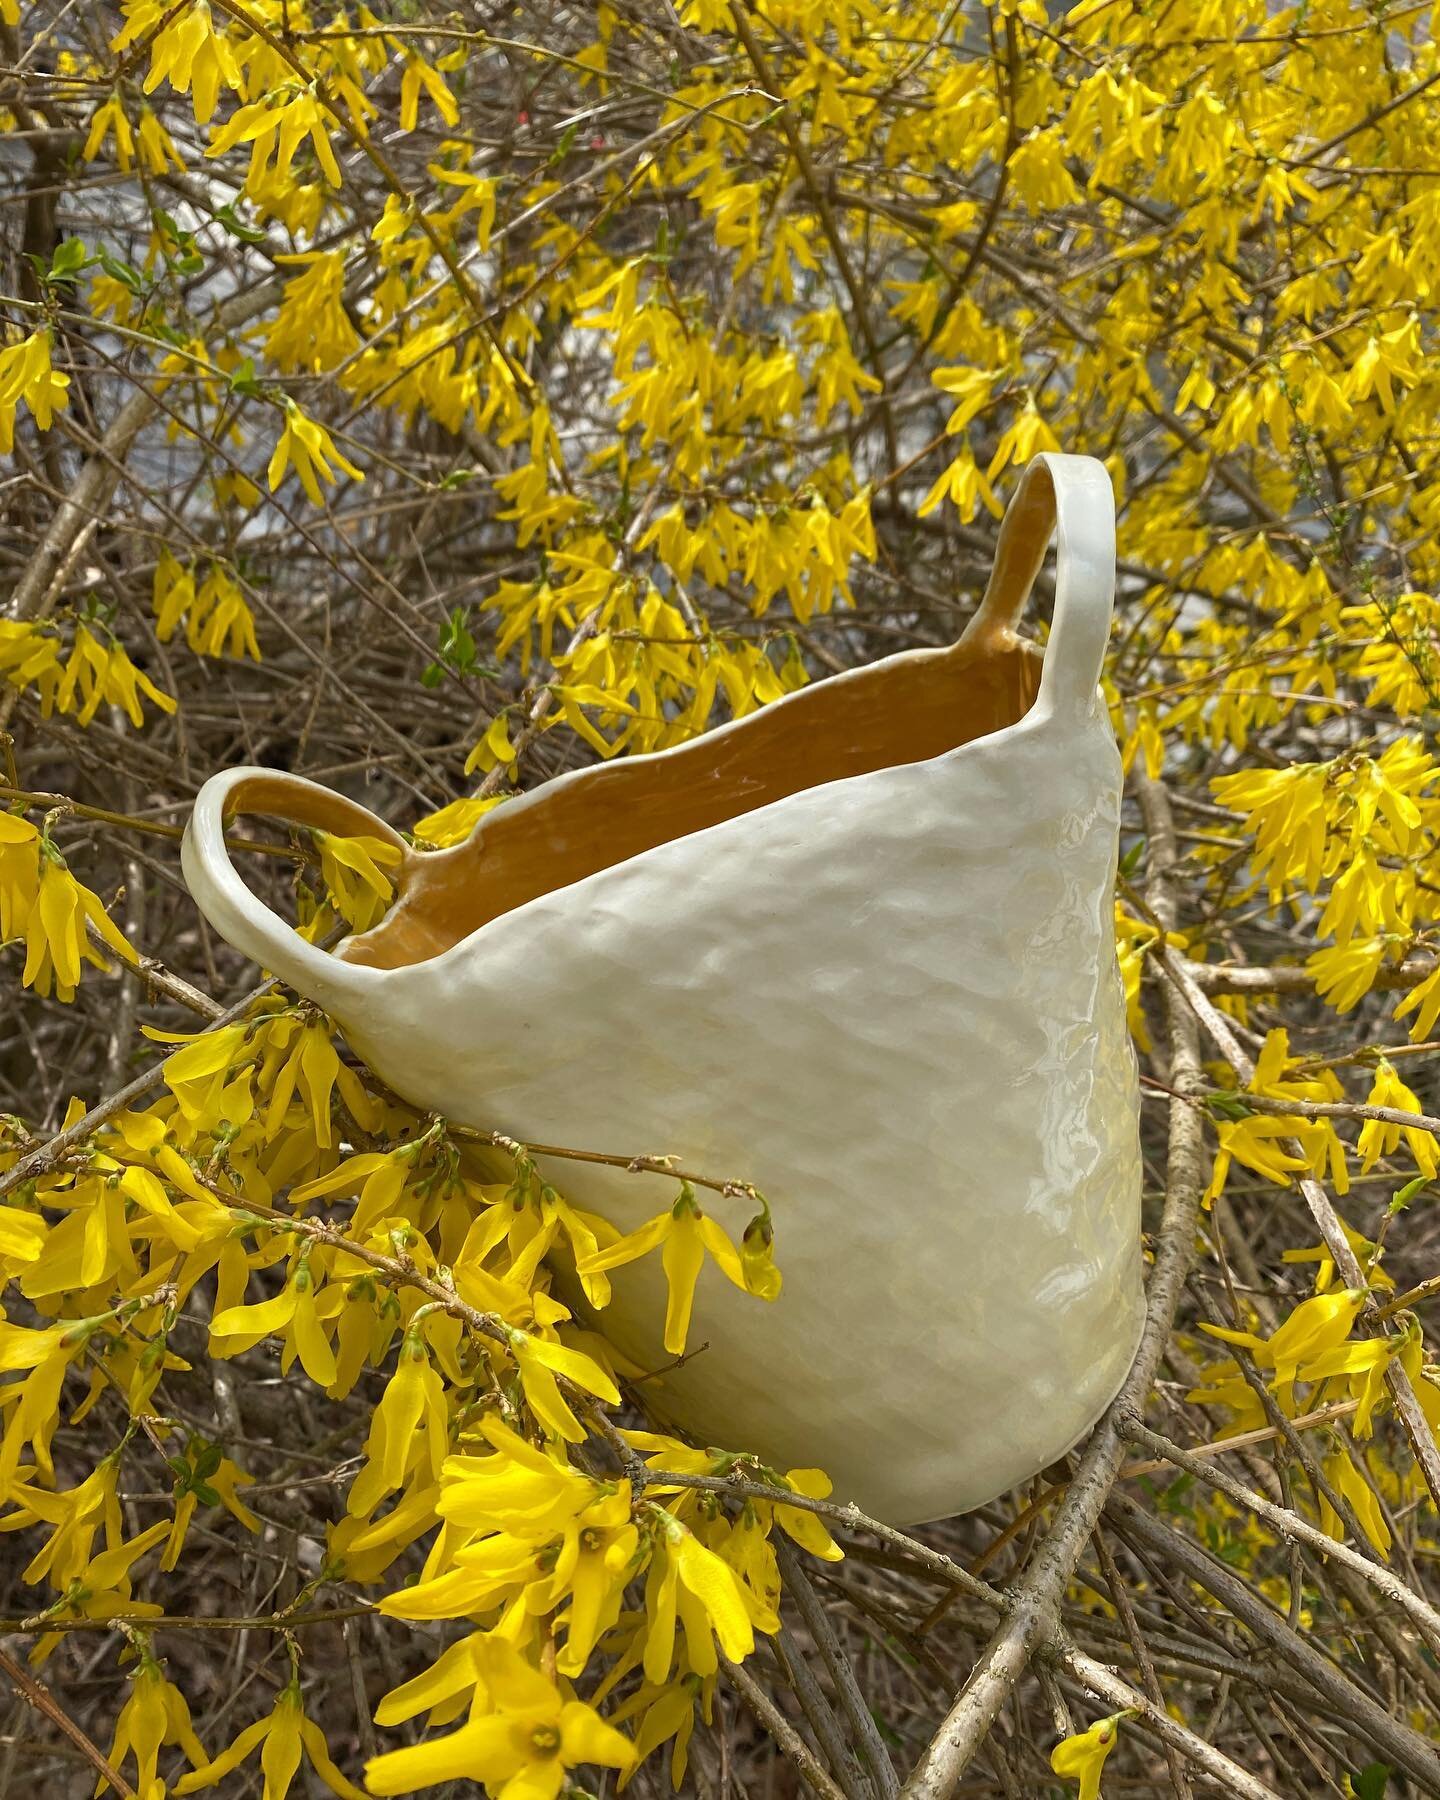 Celebrating spring blossoms
💛
White Stoneware &ldquo;basket&rdquo; with clear glazed exterior and goldenrod yellow interior glaze resting in blossoming forsythia branches, 2021 
💛
Missing making things but also making meaning each day in my own way